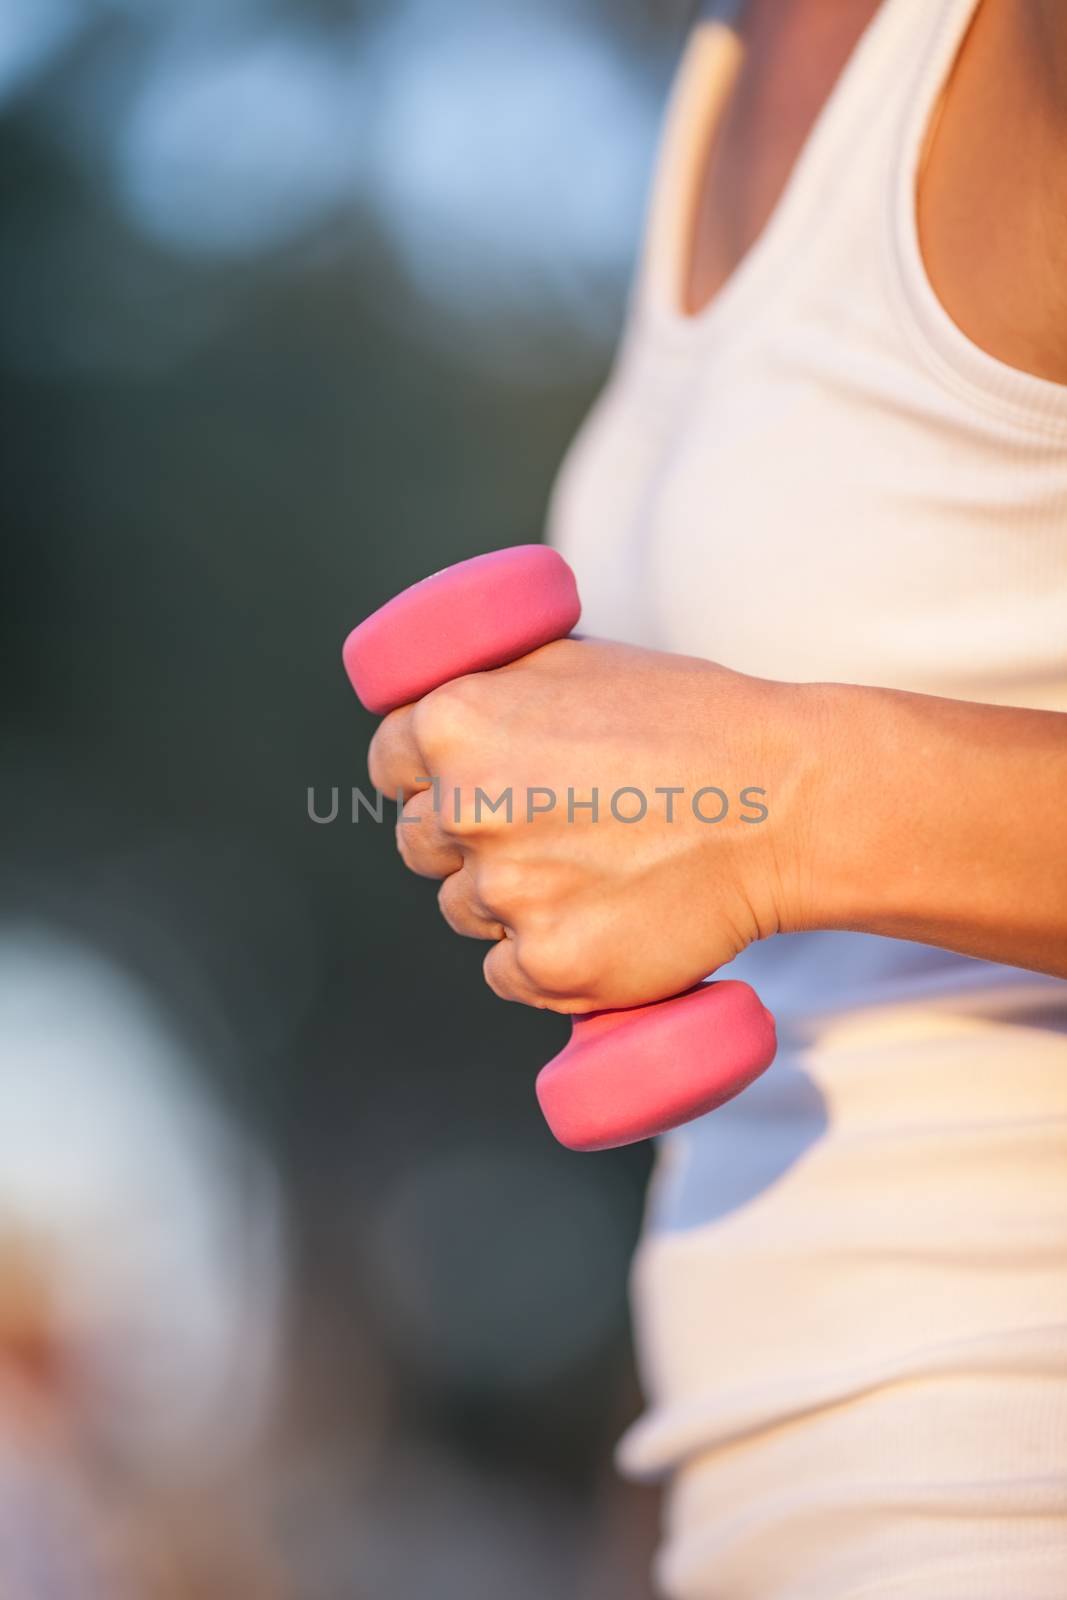 with dumbbells in hand, a healthy lifestyle